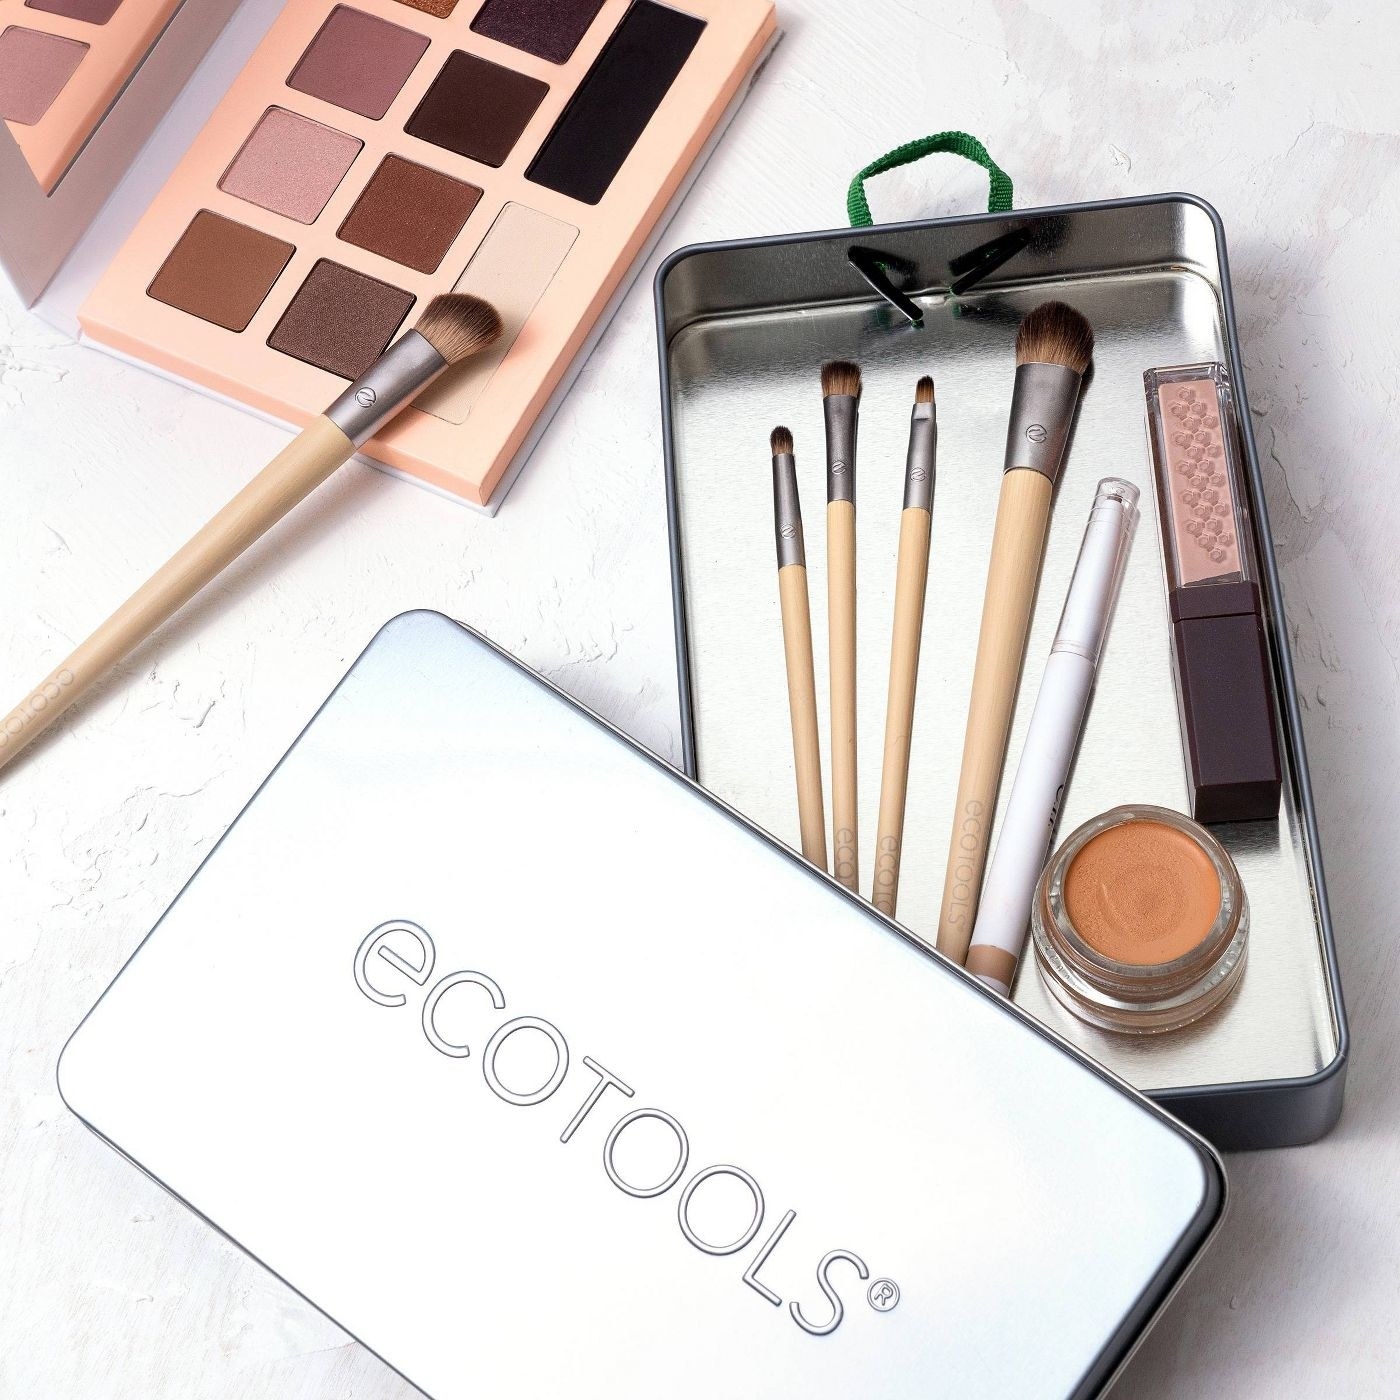 The EcoTools everyday makeup brush set and carrier